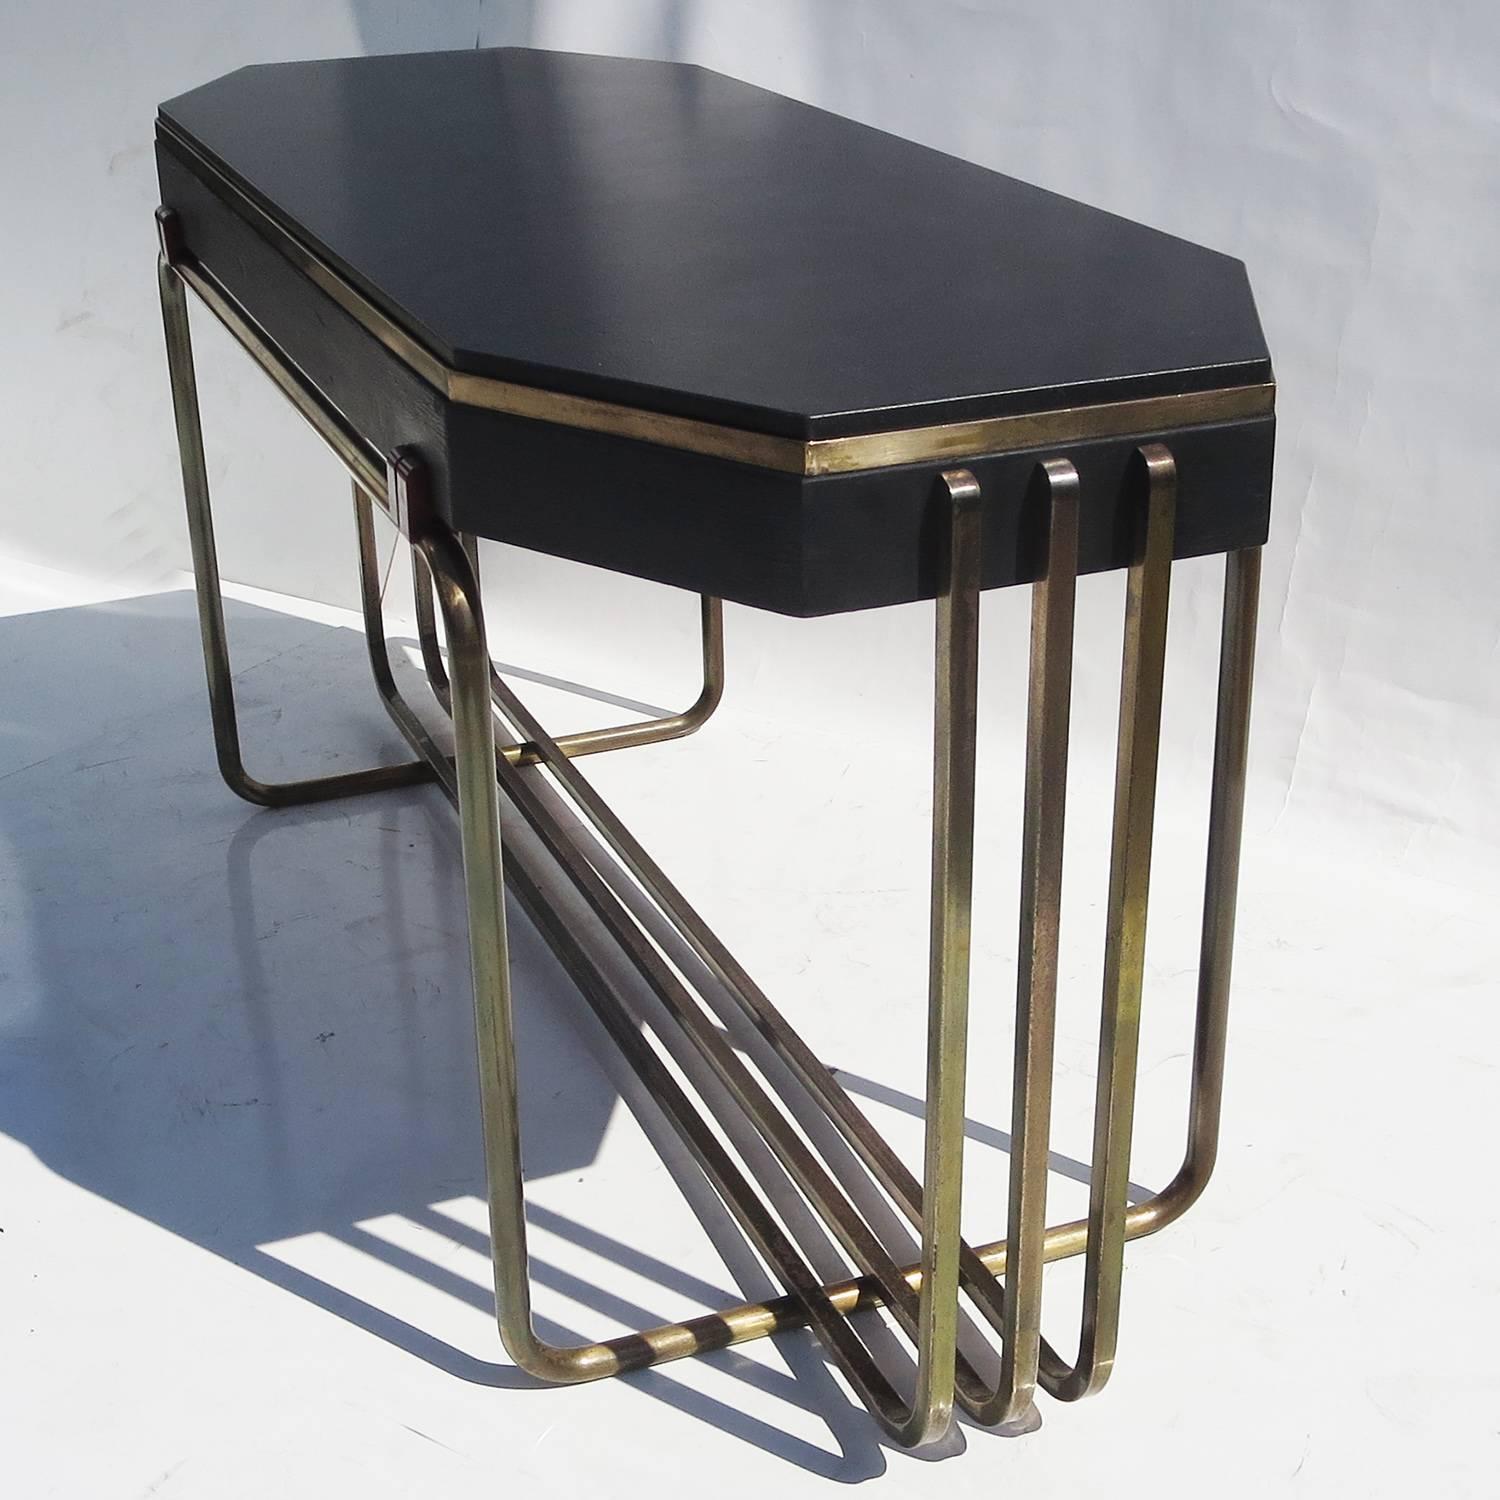 An exceptional design utilizing a base of intersecting square and round bronze tubing. The top is an octagon shaped painted wooden form, lifted off the tubes by four red catalin (bakelite) decorative blocks. A newly cut black granite top is set into